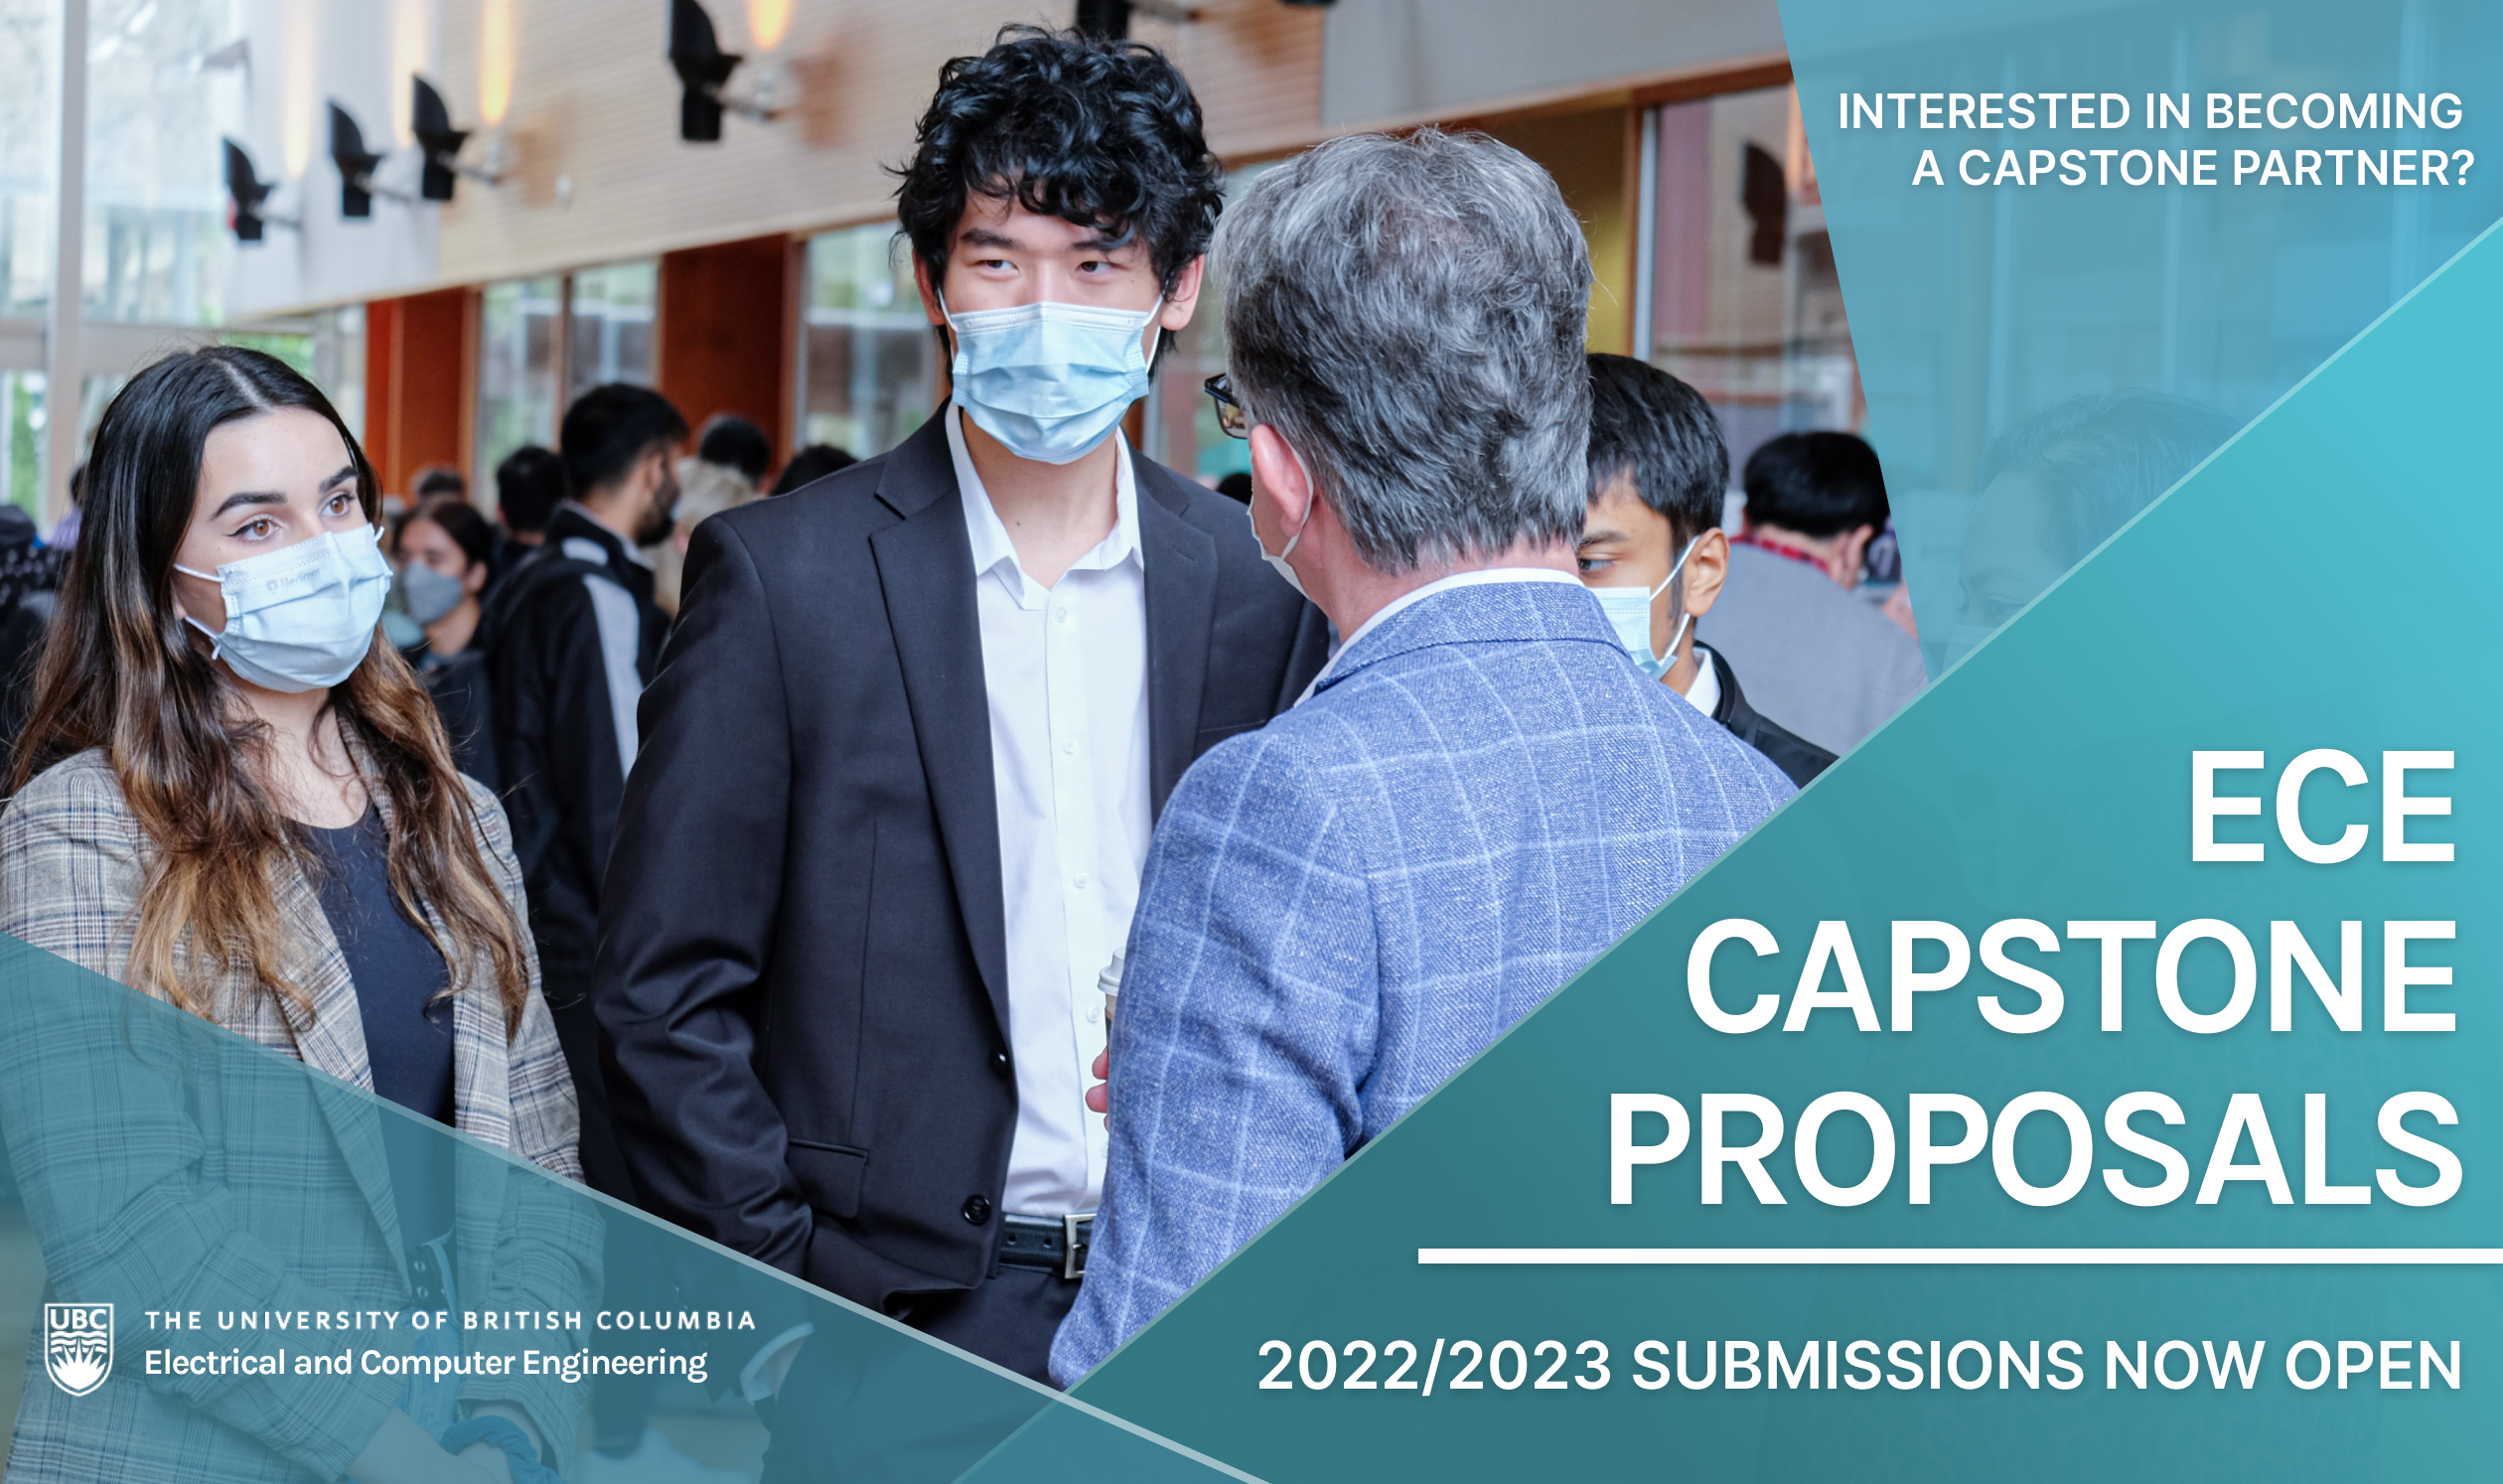 Call for Capstone Proposals